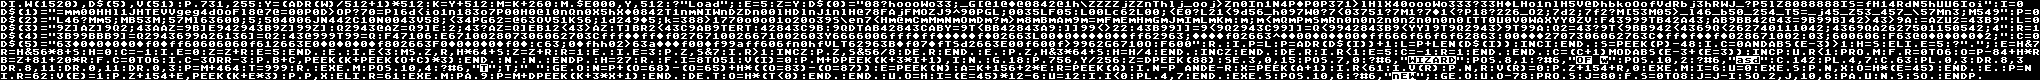 The 10 line FastBasic-language source code for 'Wizard of Wasd', rendered as a bitmap image using the Atari's native font